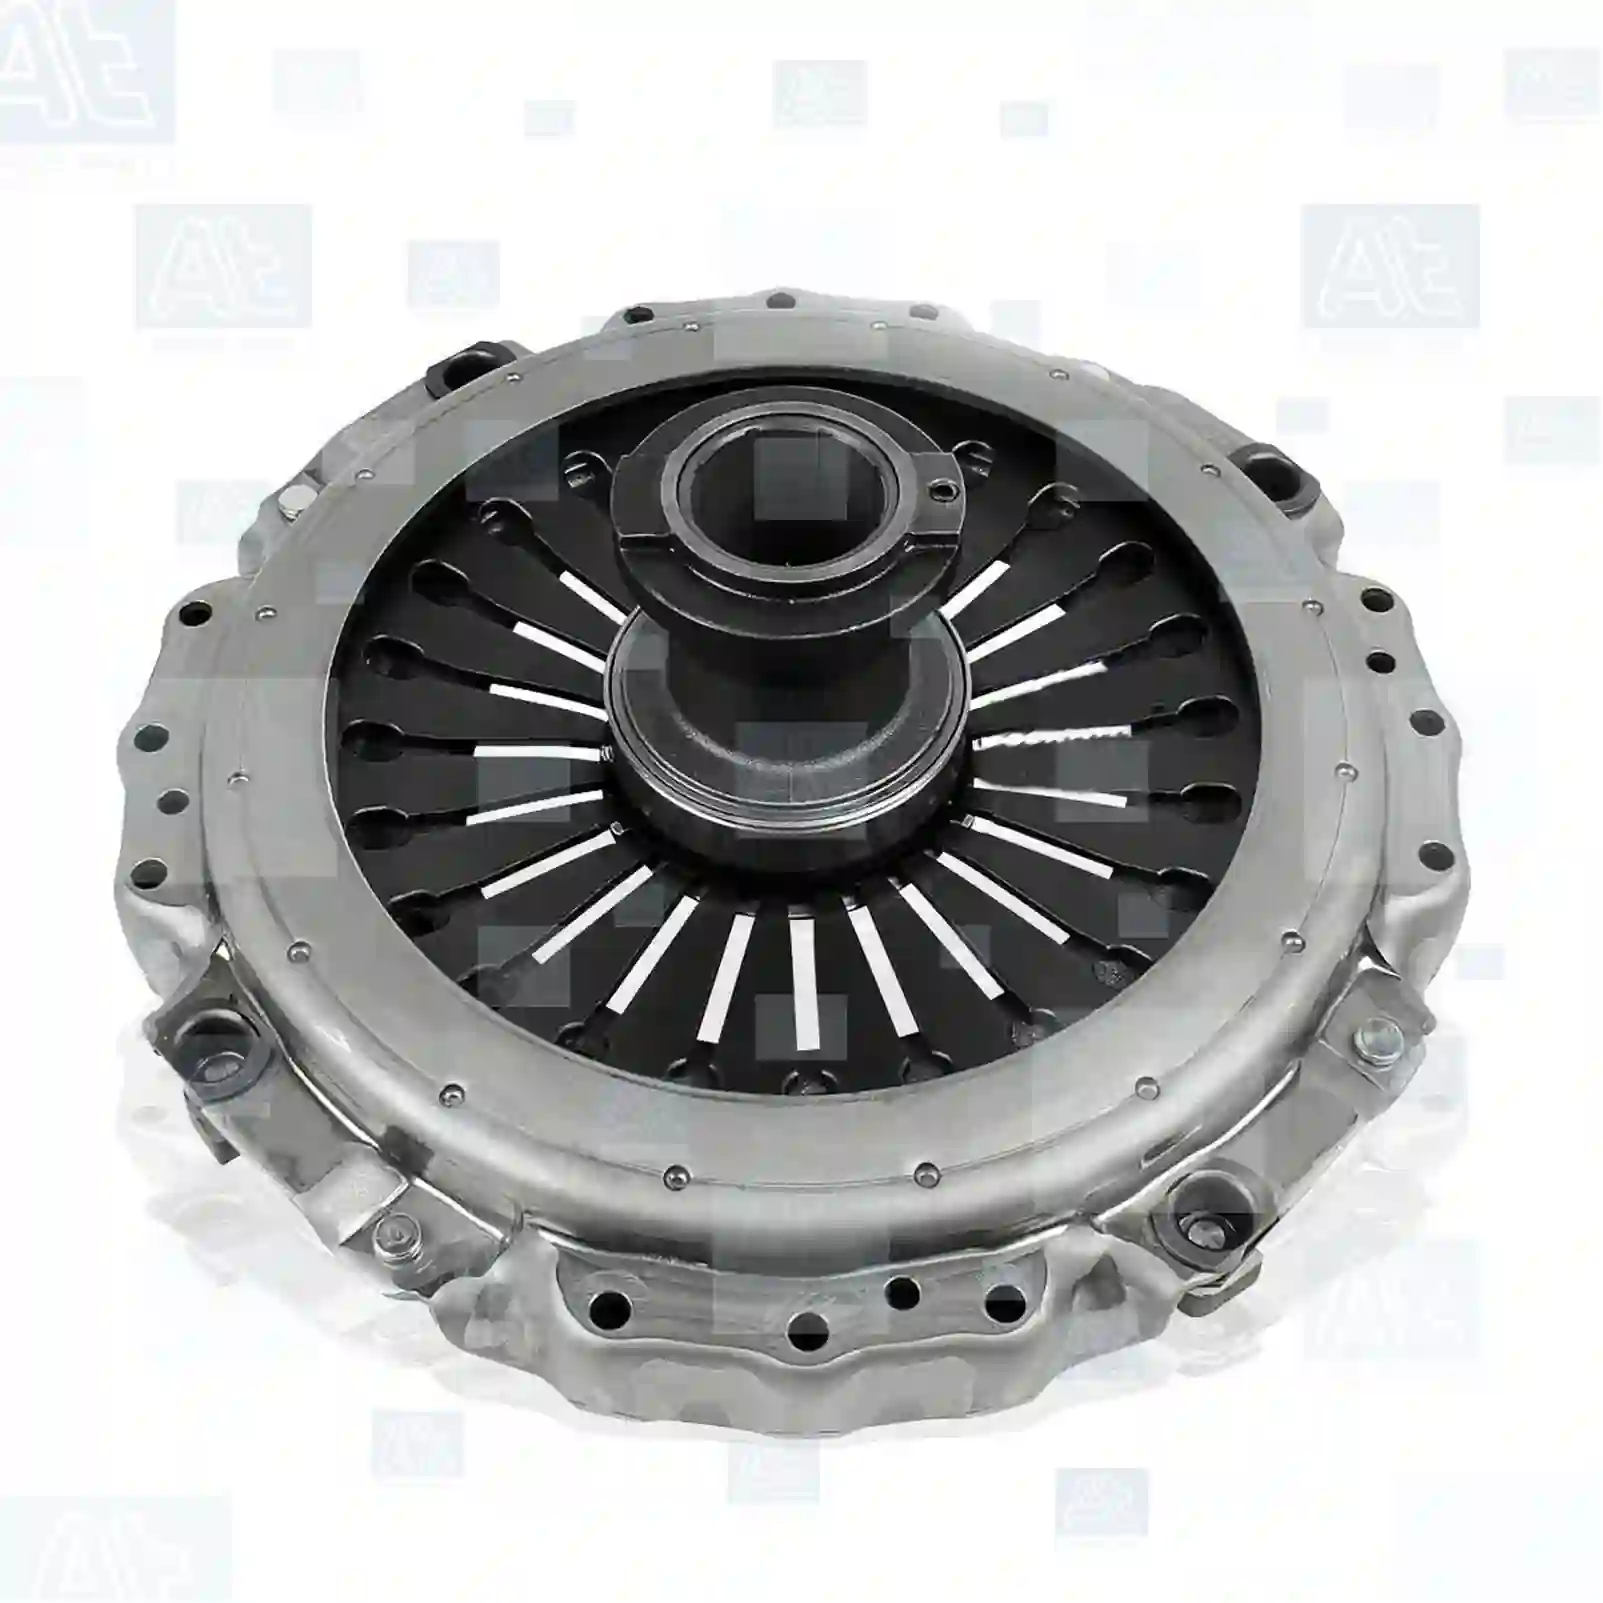 Clutch cover, with release bearing, at no 77722426, oem no: 0052506404, 005250640480, 0052506604, 005250660480, 0052509304, 005250930480, 0052509404, 005250940480, 0072506104, 007250610480, 0072506504, 0072507904, 0072508104, 0072509704, 0082502404, 0082503004, 0082503104, 0082504404, 0092500704, 0092500804, 0092508304, 0102500704, 0102500804, 0102501004, 0212504001, 0212504101, 0222502001, 0222505501, 0242500101, 0242500201, 0242500401, 0242507401, 0262504701, 0262506601, 442999513000 At Spare Part | Engine, Accelerator Pedal, Camshaft, Connecting Rod, Crankcase, Crankshaft, Cylinder Head, Engine Suspension Mountings, Exhaust Manifold, Exhaust Gas Recirculation, Filter Kits, Flywheel Housing, General Overhaul Kits, Engine, Intake Manifold, Oil Cleaner, Oil Cooler, Oil Filter, Oil Pump, Oil Sump, Piston & Liner, Sensor & Switch, Timing Case, Turbocharger, Cooling System, Belt Tensioner, Coolant Filter, Coolant Pipe, Corrosion Prevention Agent, Drive, Expansion Tank, Fan, Intercooler, Monitors & Gauges, Radiator, Thermostat, V-Belt / Timing belt, Water Pump, Fuel System, Electronical Injector Unit, Feed Pump, Fuel Filter, cpl., Fuel Gauge Sender,  Fuel Line, Fuel Pump, Fuel Tank, Injection Line Kit, Injection Pump, Exhaust System, Clutch & Pedal, Gearbox, Propeller Shaft, Axles, Brake System, Hubs & Wheels, Suspension, Leaf Spring, Universal Parts / Accessories, Steering, Electrical System, Cabin Clutch cover, with release bearing, at no 77722426, oem no: 0052506404, 005250640480, 0052506604, 005250660480, 0052509304, 005250930480, 0052509404, 005250940480, 0072506104, 007250610480, 0072506504, 0072507904, 0072508104, 0072509704, 0082502404, 0082503004, 0082503104, 0082504404, 0092500704, 0092500804, 0092508304, 0102500704, 0102500804, 0102501004, 0212504001, 0212504101, 0222502001, 0222505501, 0242500101, 0242500201, 0242500401, 0242507401, 0262504701, 0262506601, 442999513000 At Spare Part | Engine, Accelerator Pedal, Camshaft, Connecting Rod, Crankcase, Crankshaft, Cylinder Head, Engine Suspension Mountings, Exhaust Manifold, Exhaust Gas Recirculation, Filter Kits, Flywheel Housing, General Overhaul Kits, Engine, Intake Manifold, Oil Cleaner, Oil Cooler, Oil Filter, Oil Pump, Oil Sump, Piston & Liner, Sensor & Switch, Timing Case, Turbocharger, Cooling System, Belt Tensioner, Coolant Filter, Coolant Pipe, Corrosion Prevention Agent, Drive, Expansion Tank, Fan, Intercooler, Monitors & Gauges, Radiator, Thermostat, V-Belt / Timing belt, Water Pump, Fuel System, Electronical Injector Unit, Feed Pump, Fuel Filter, cpl., Fuel Gauge Sender,  Fuel Line, Fuel Pump, Fuel Tank, Injection Line Kit, Injection Pump, Exhaust System, Clutch & Pedal, Gearbox, Propeller Shaft, Axles, Brake System, Hubs & Wheels, Suspension, Leaf Spring, Universal Parts / Accessories, Steering, Electrical System, Cabin